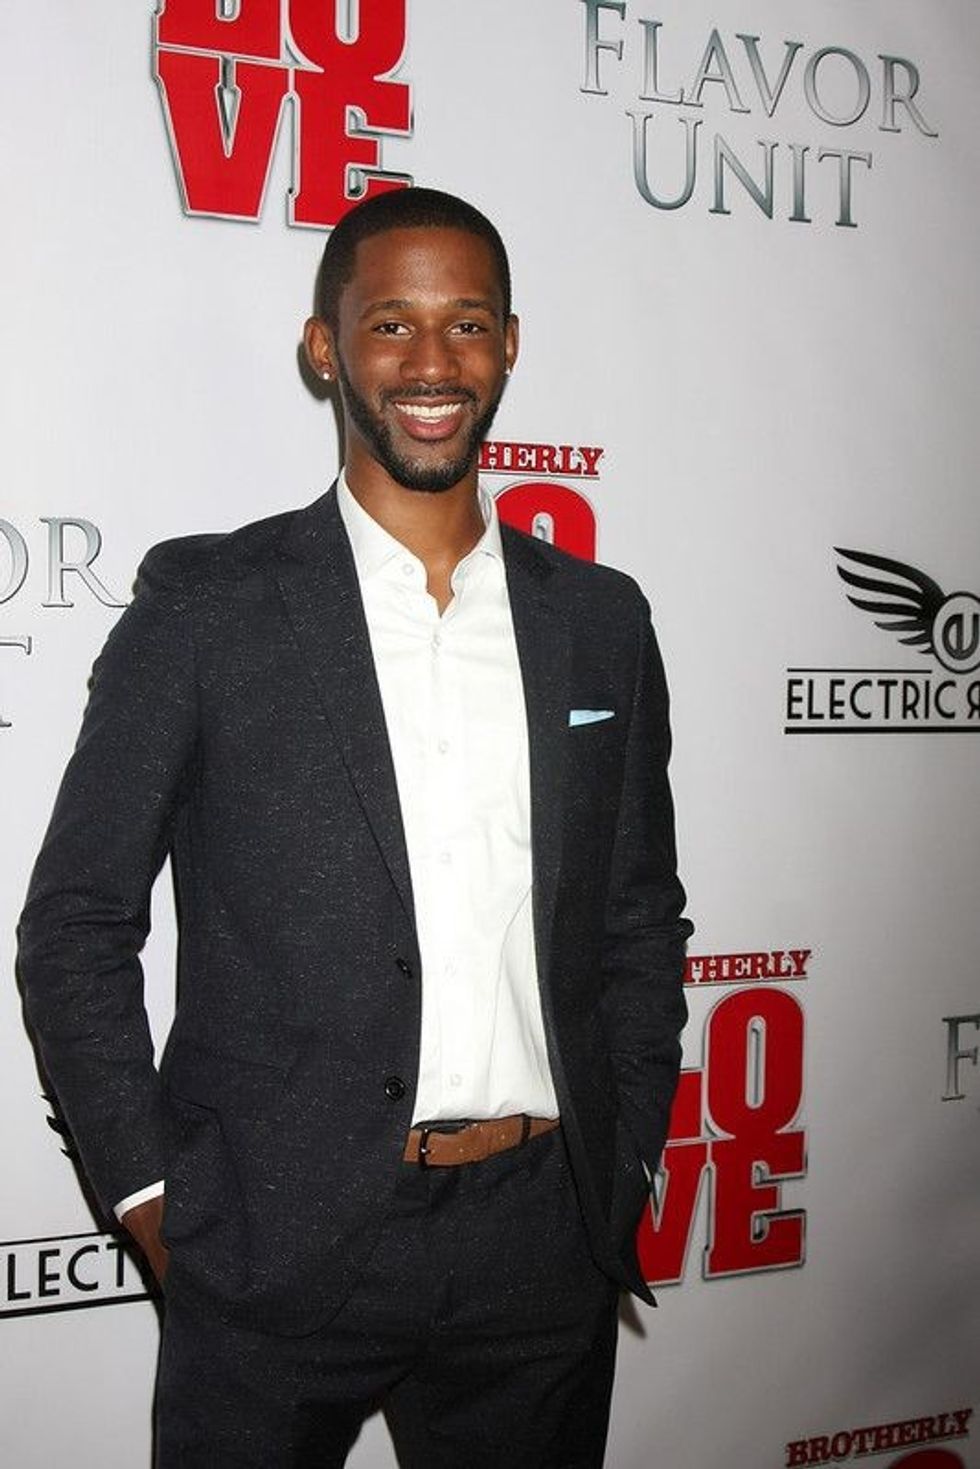 October-born New York-based actor Eric D. Hill Jr. is famous for his works on television and in films like 'Hurricane Season' and 'Brotherly Love.'